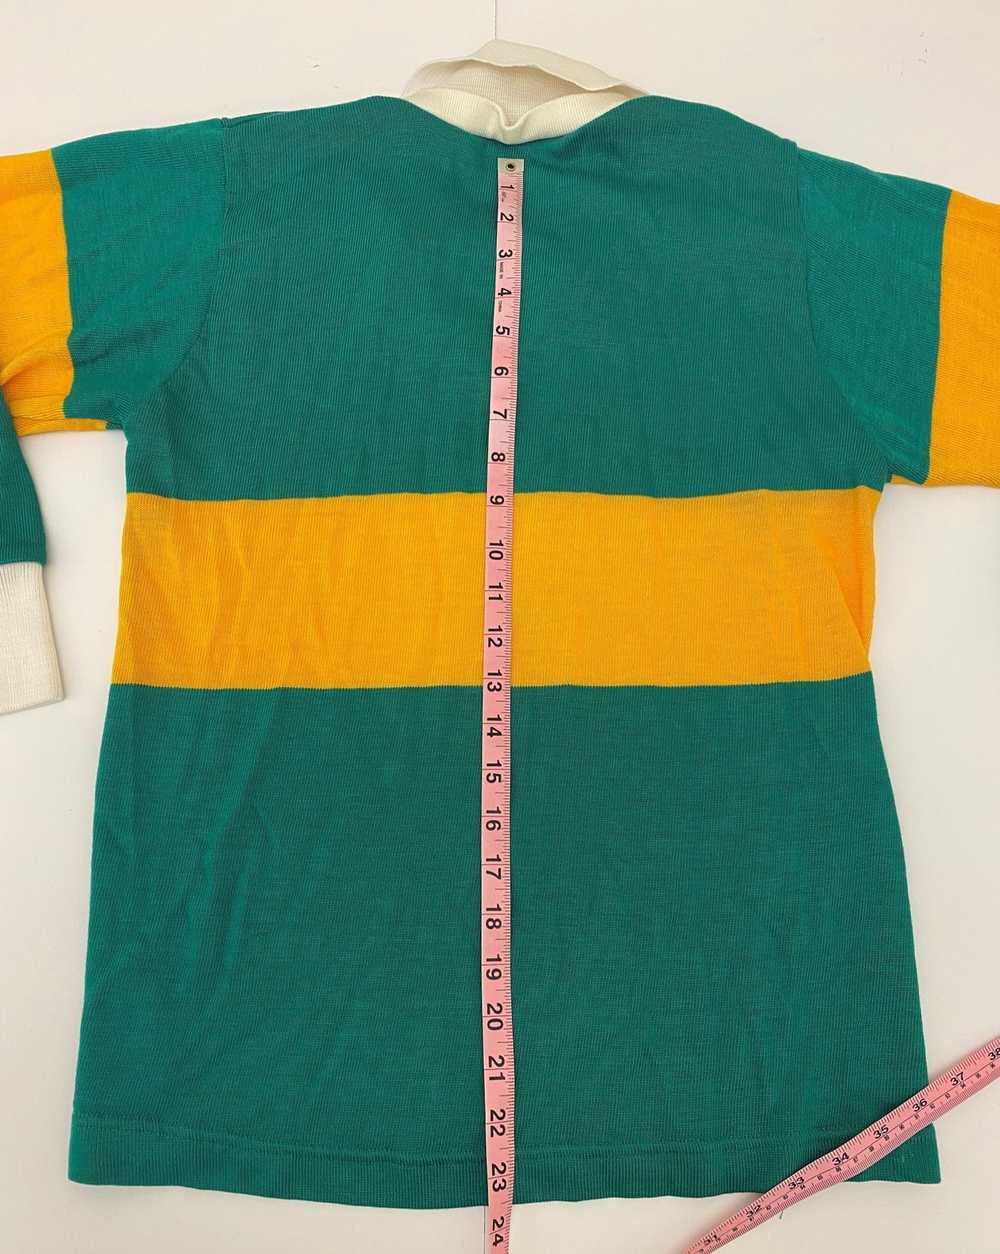 Oneill OLD rugby shirt - image 10